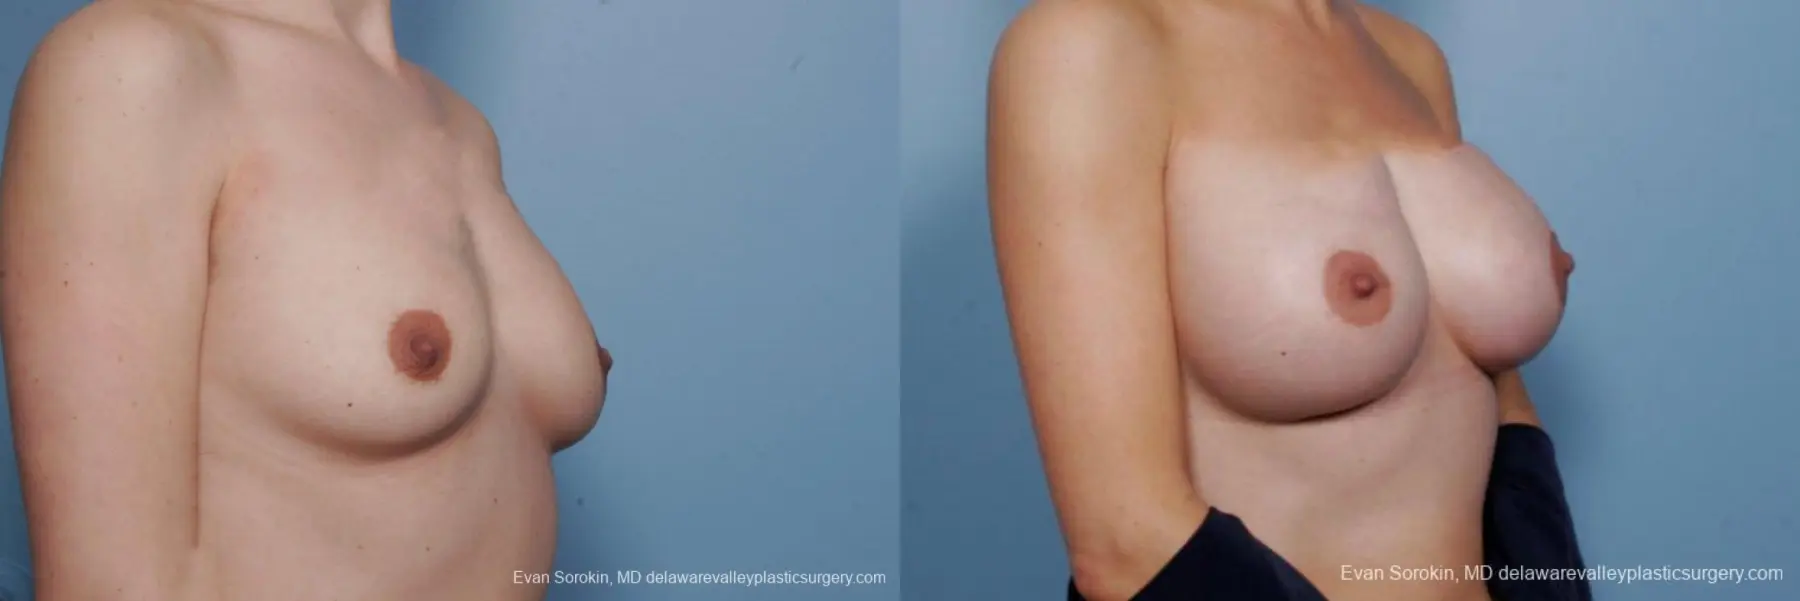 Philadelphia Breast Augmentation 9385 - Before and After 2